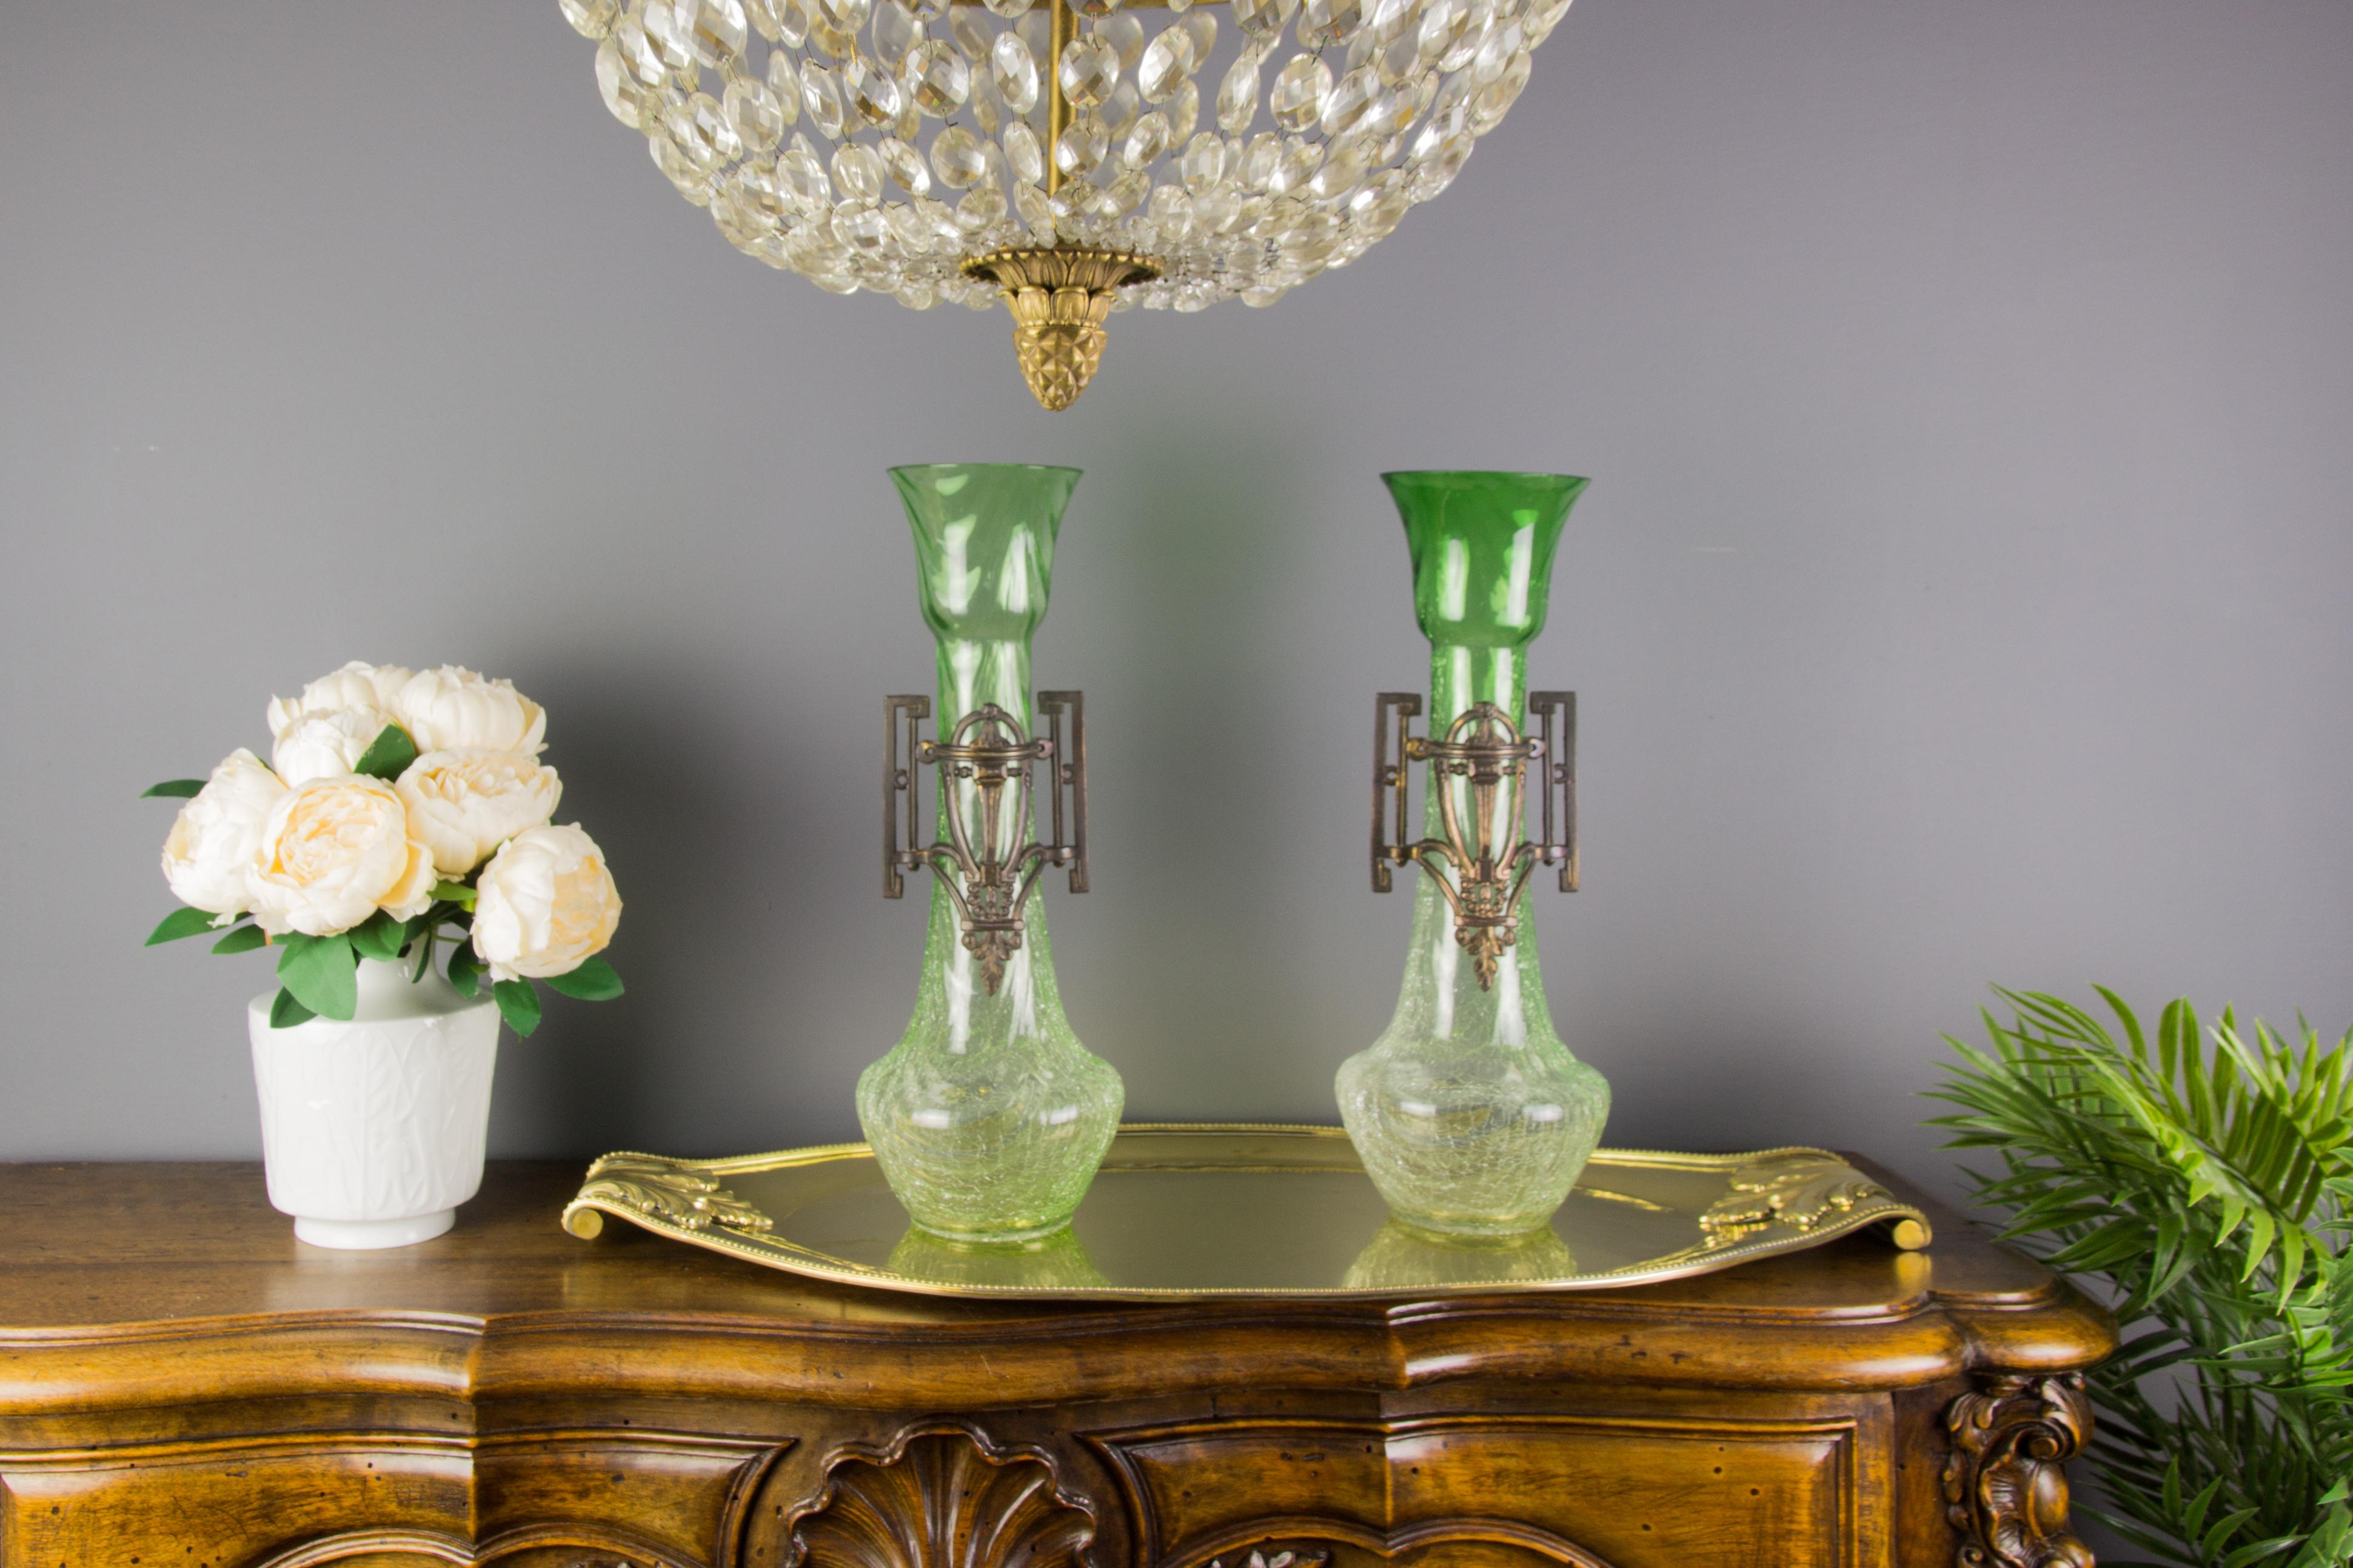 A beautiful pair of large Art Nouveau vases made of clear green crackle glass with stylized Art Nouveau patinated pewter ornate mounts.
Dimensions: height 40 cm / 15.74 in, diameter 14 cm / 5.51 in.